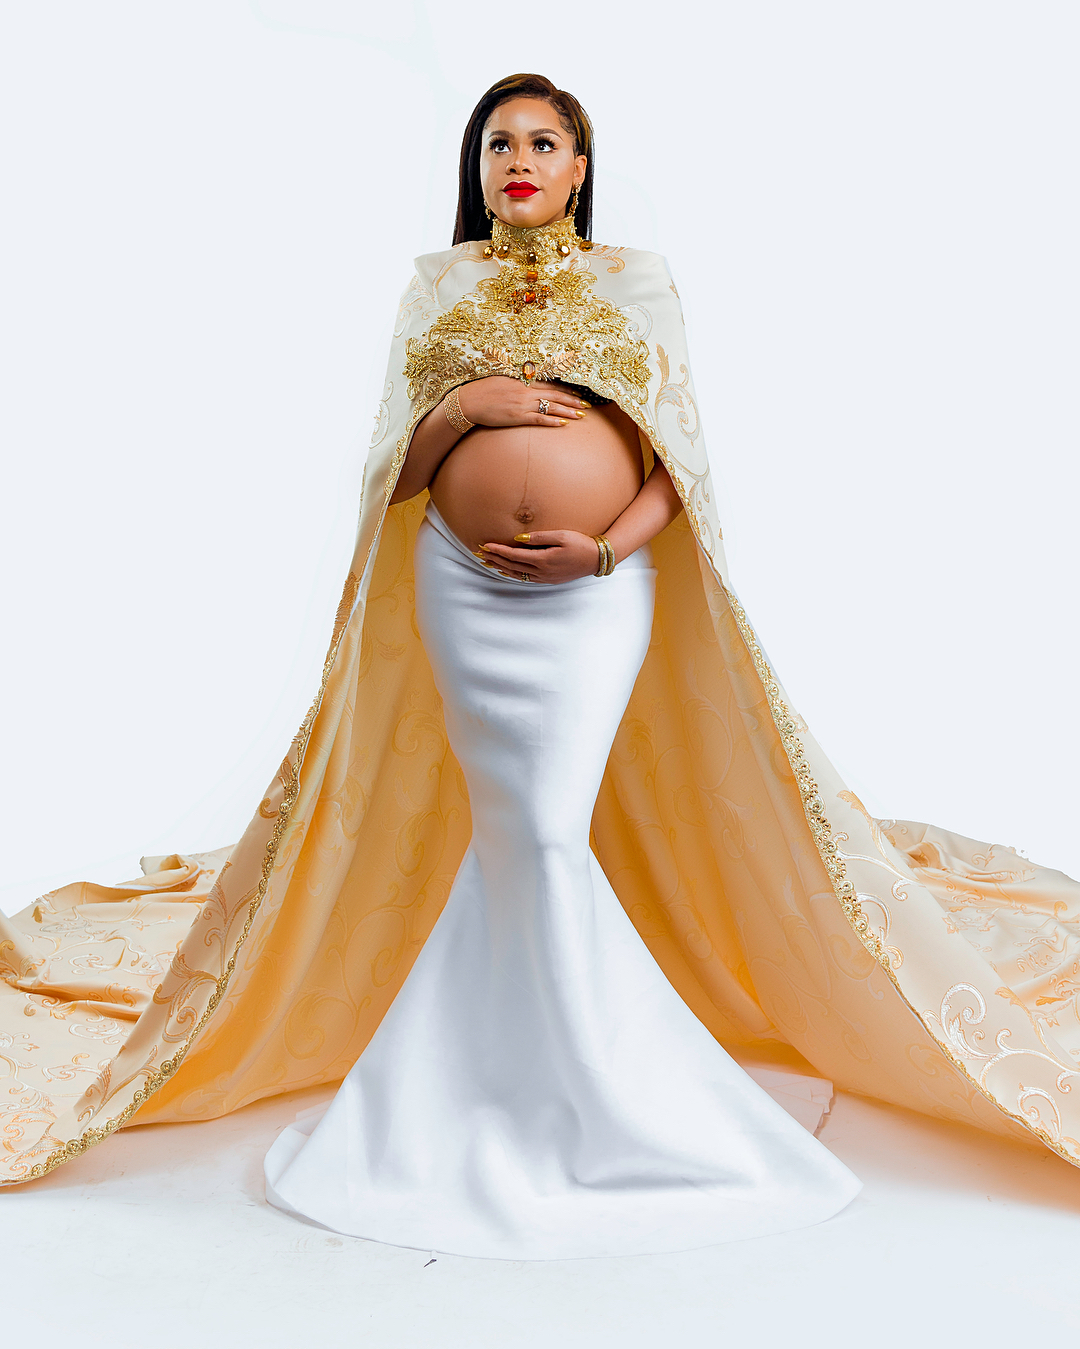 Fani Kayode and wife expecting triplets, Peep her stunning maternity photos